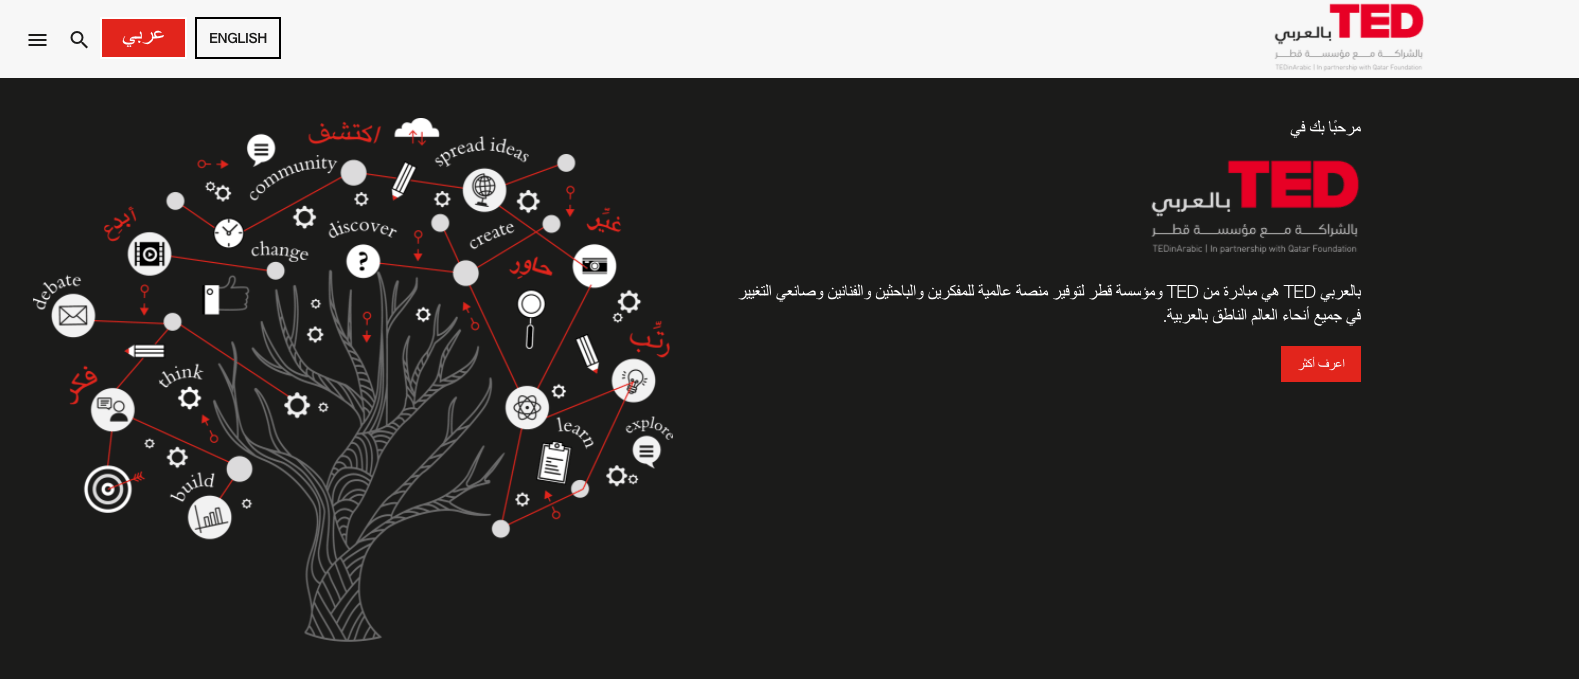 Custom TED website in both Arabic and English languages with curated content